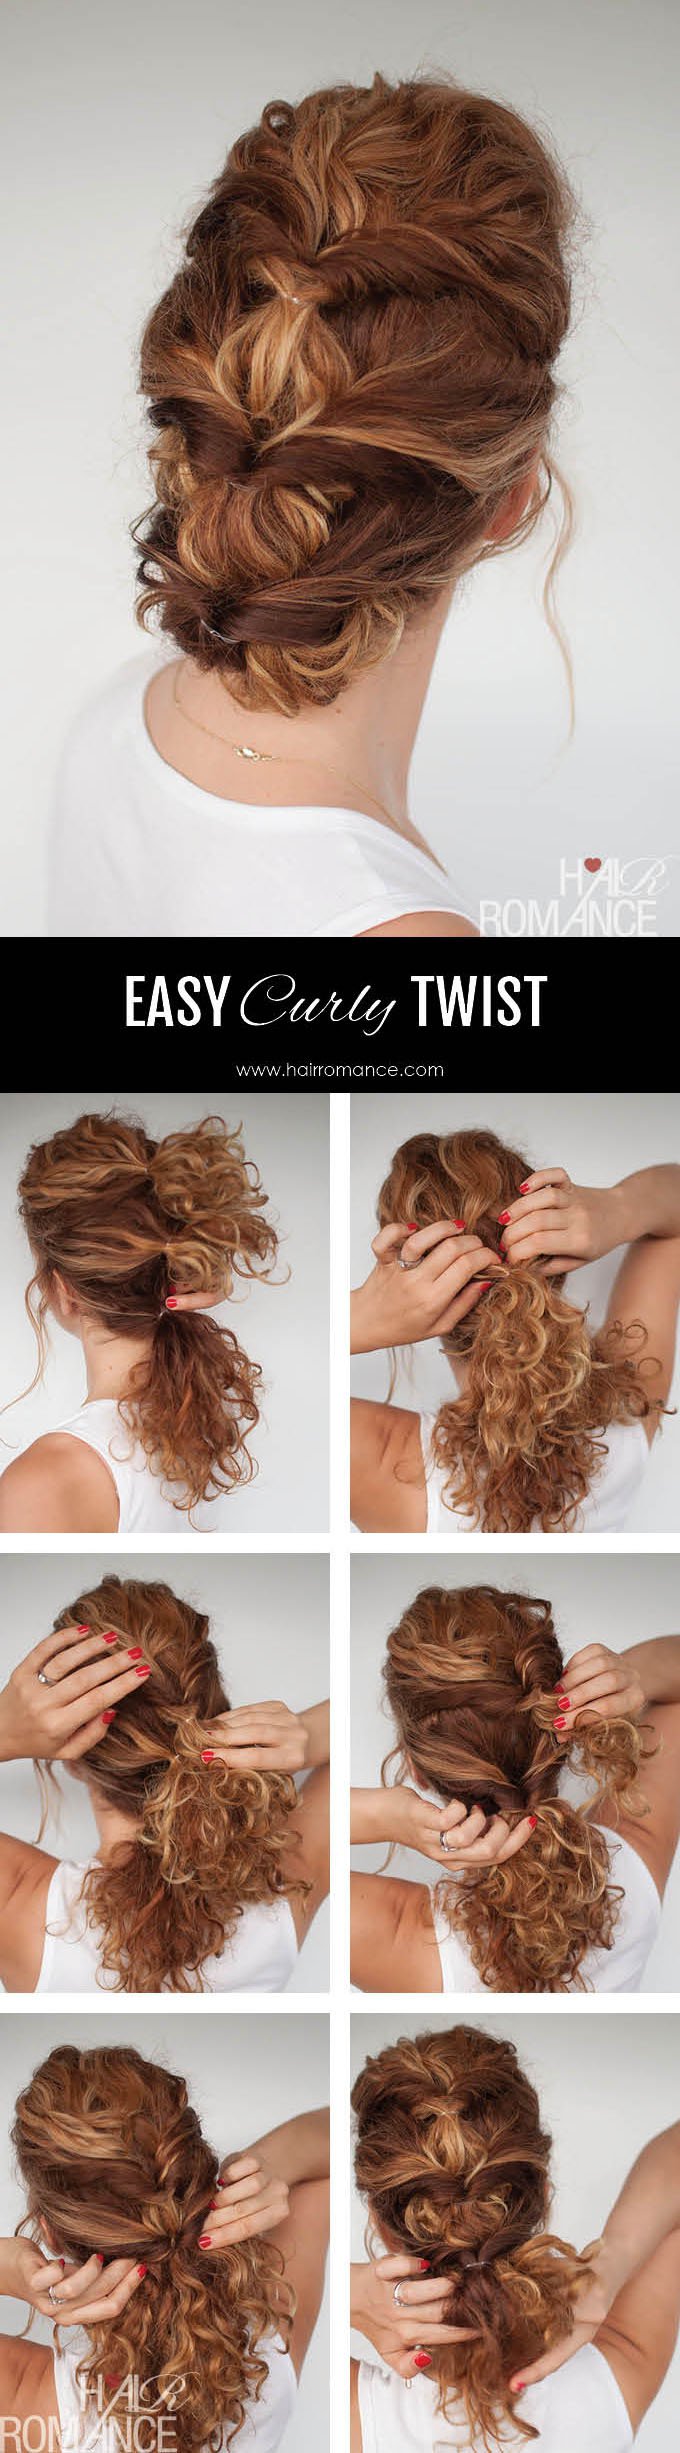 Twisted Updo for Curly Hair